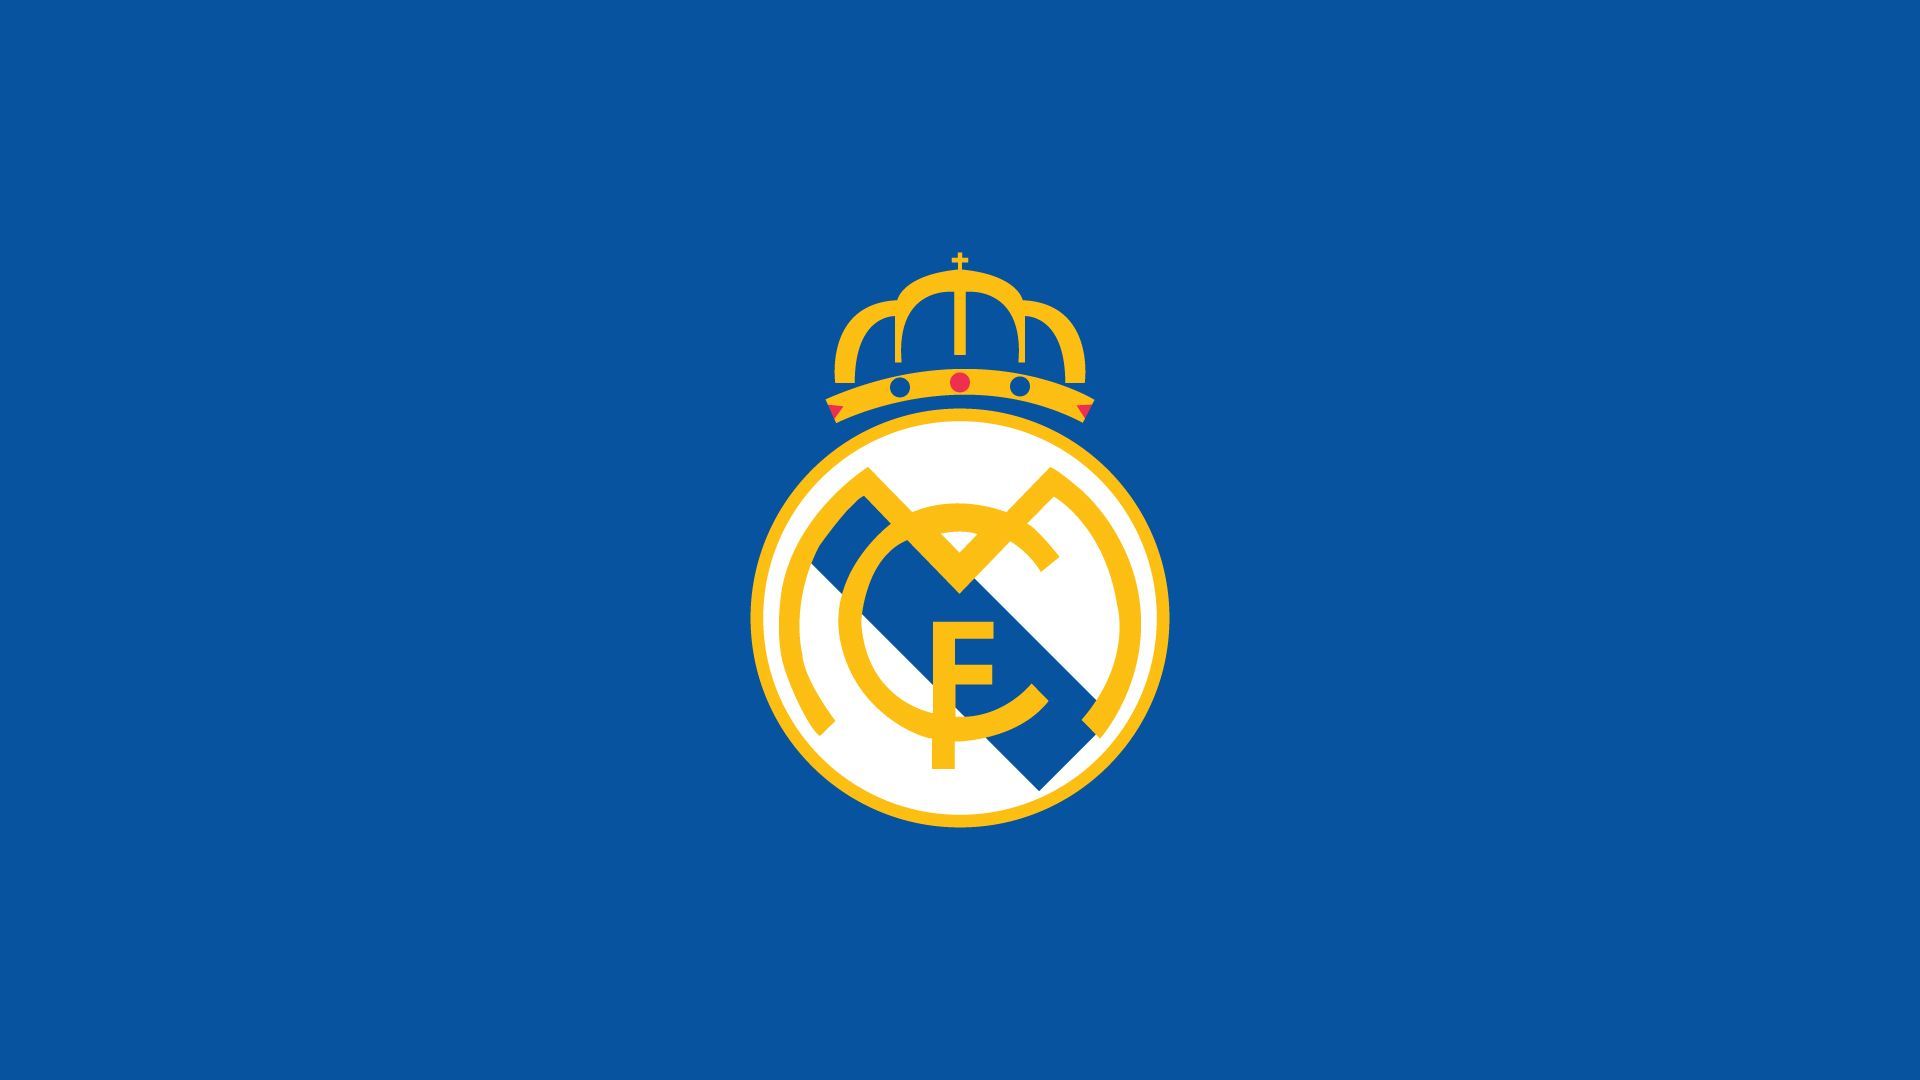 Made a simple Real Madrid wallpaper for anyone interested